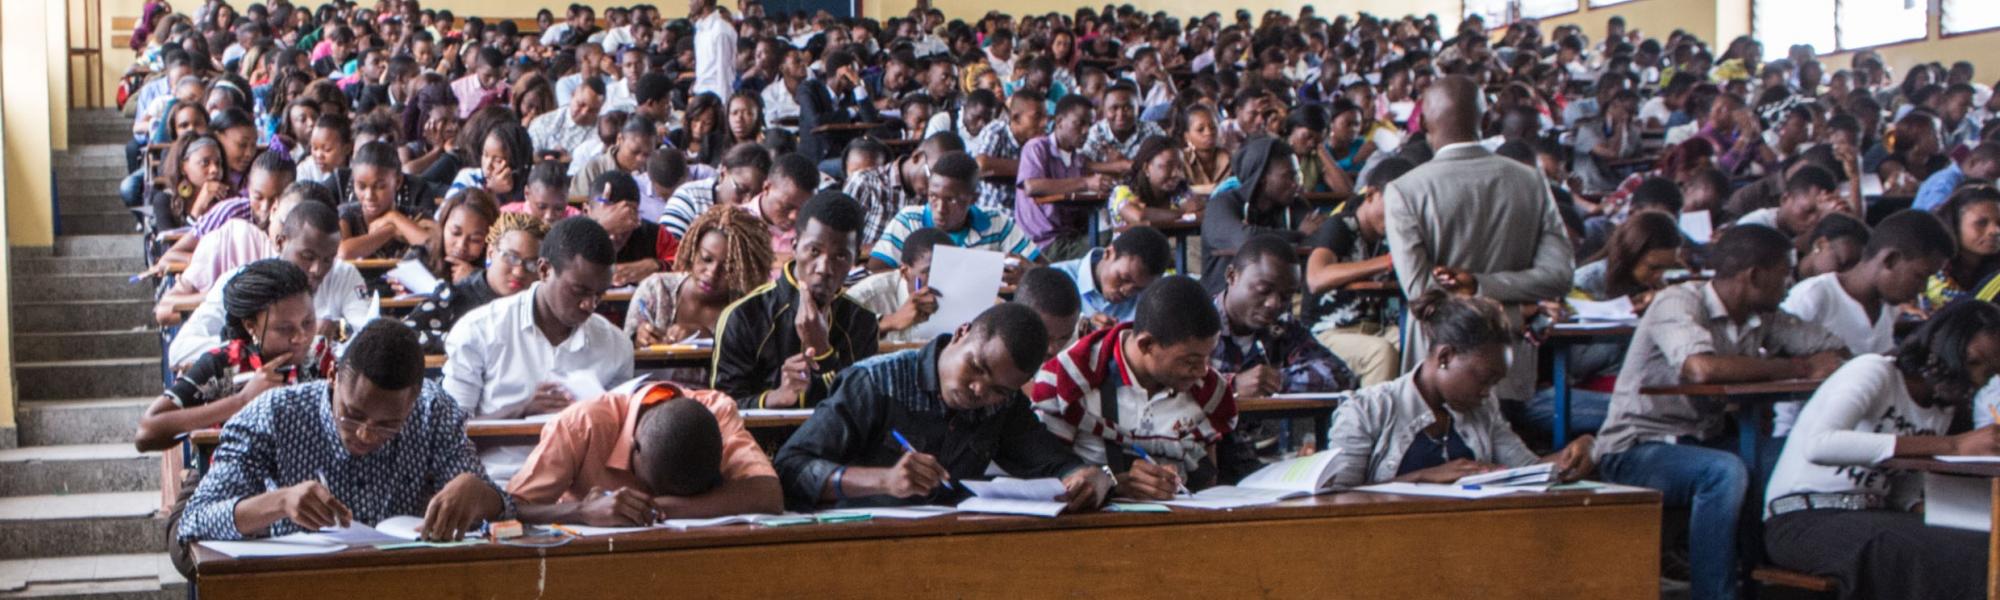 Students taking notes during class at Université Protestante au Congo